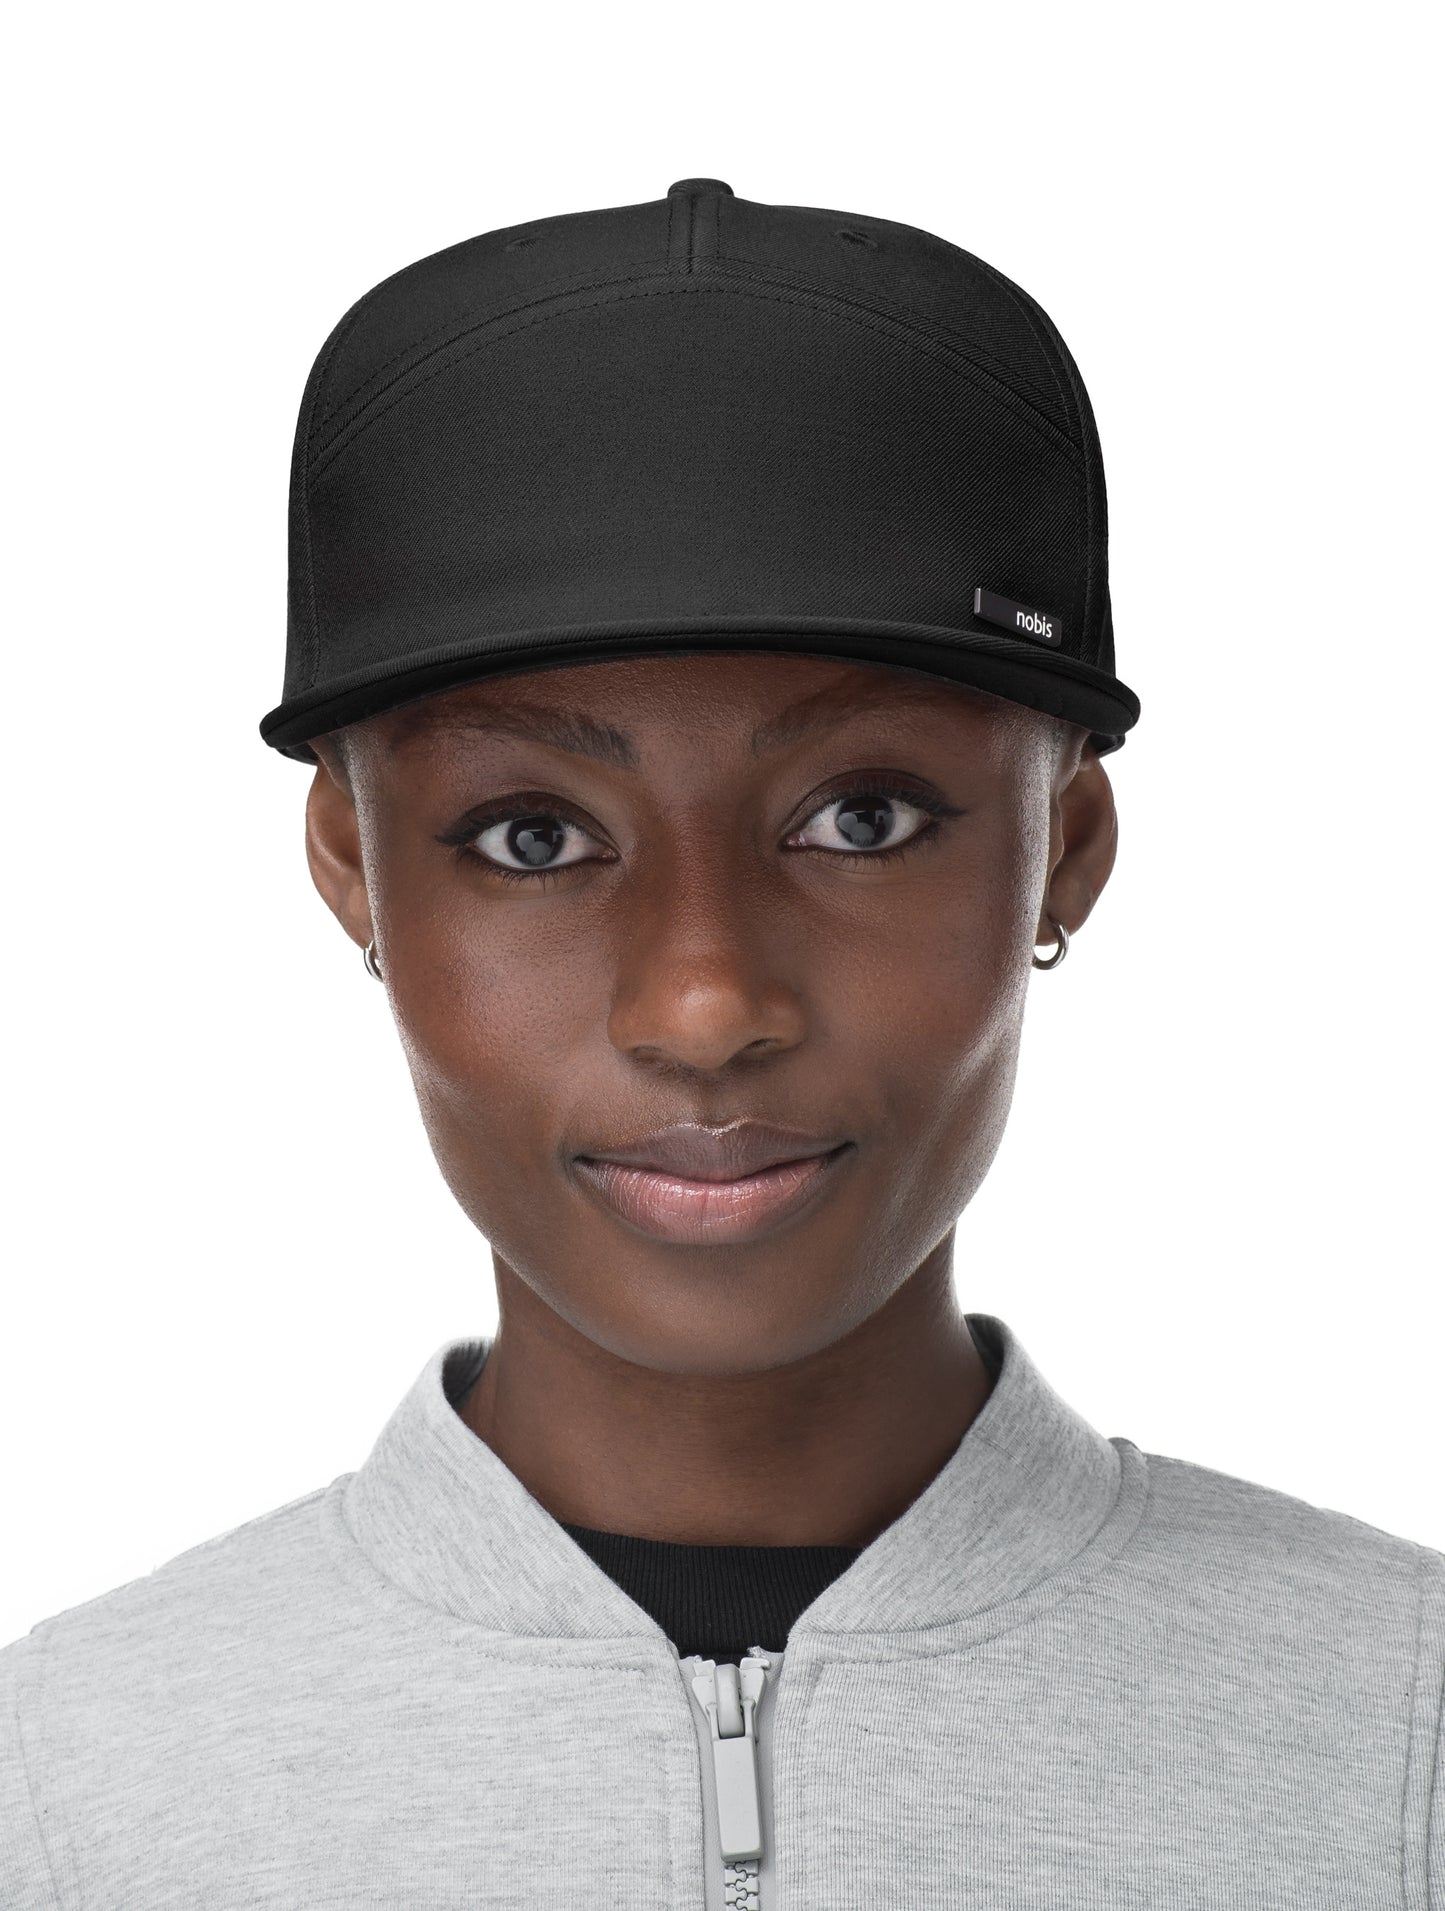 Unisex 7-panel snapback hat with flat brim and structured crown in Black